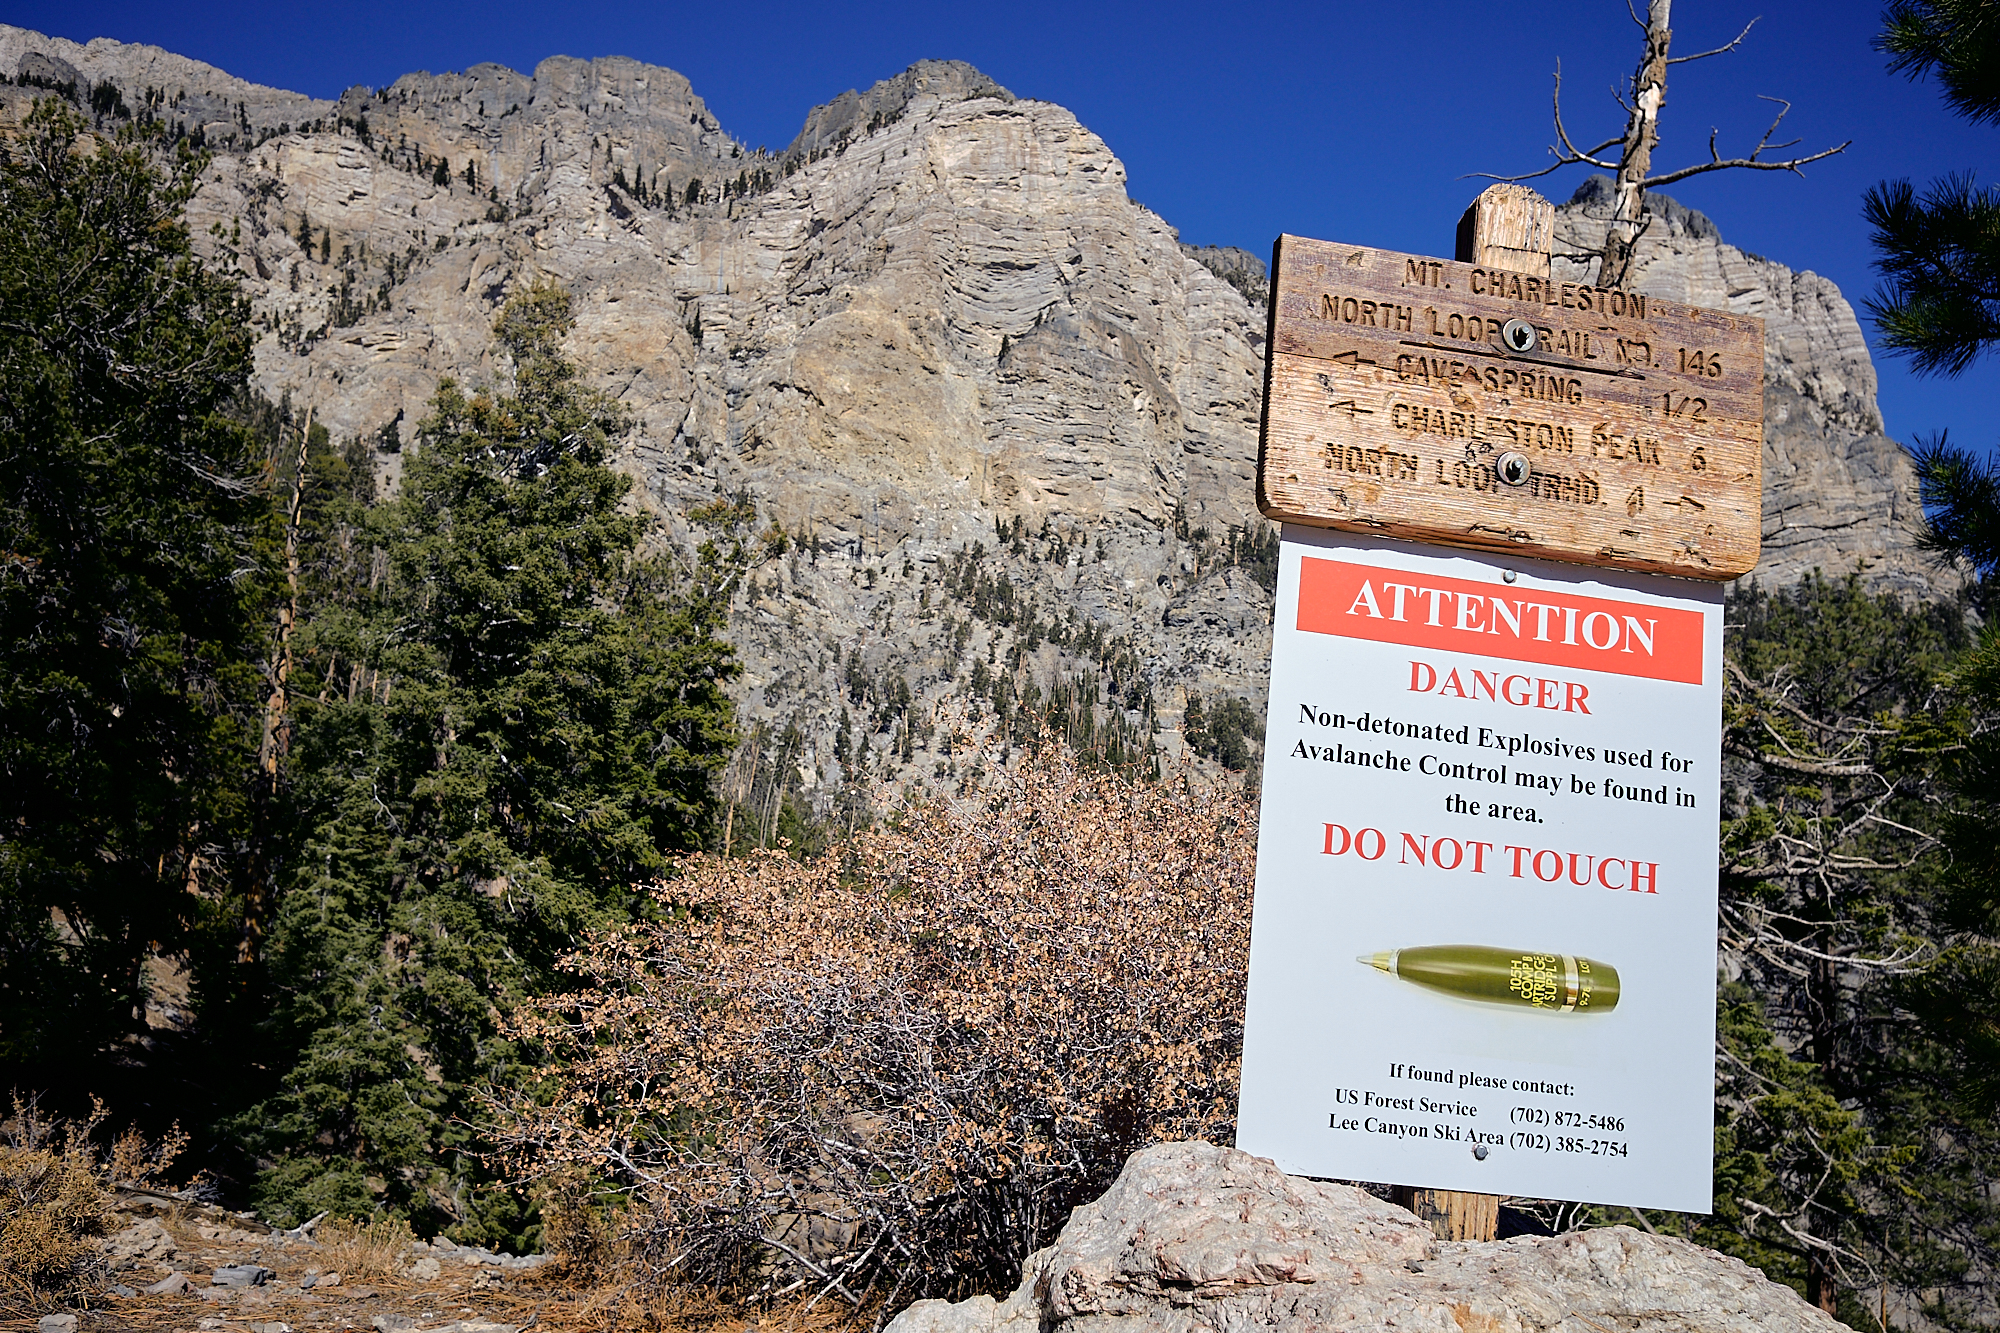  On a hike with my friend Althea we stumbled upon a trail intersection with a sign warning of explosives which have been placed to manage avalanches. | Mt. Charelston, NV 11/9/18 